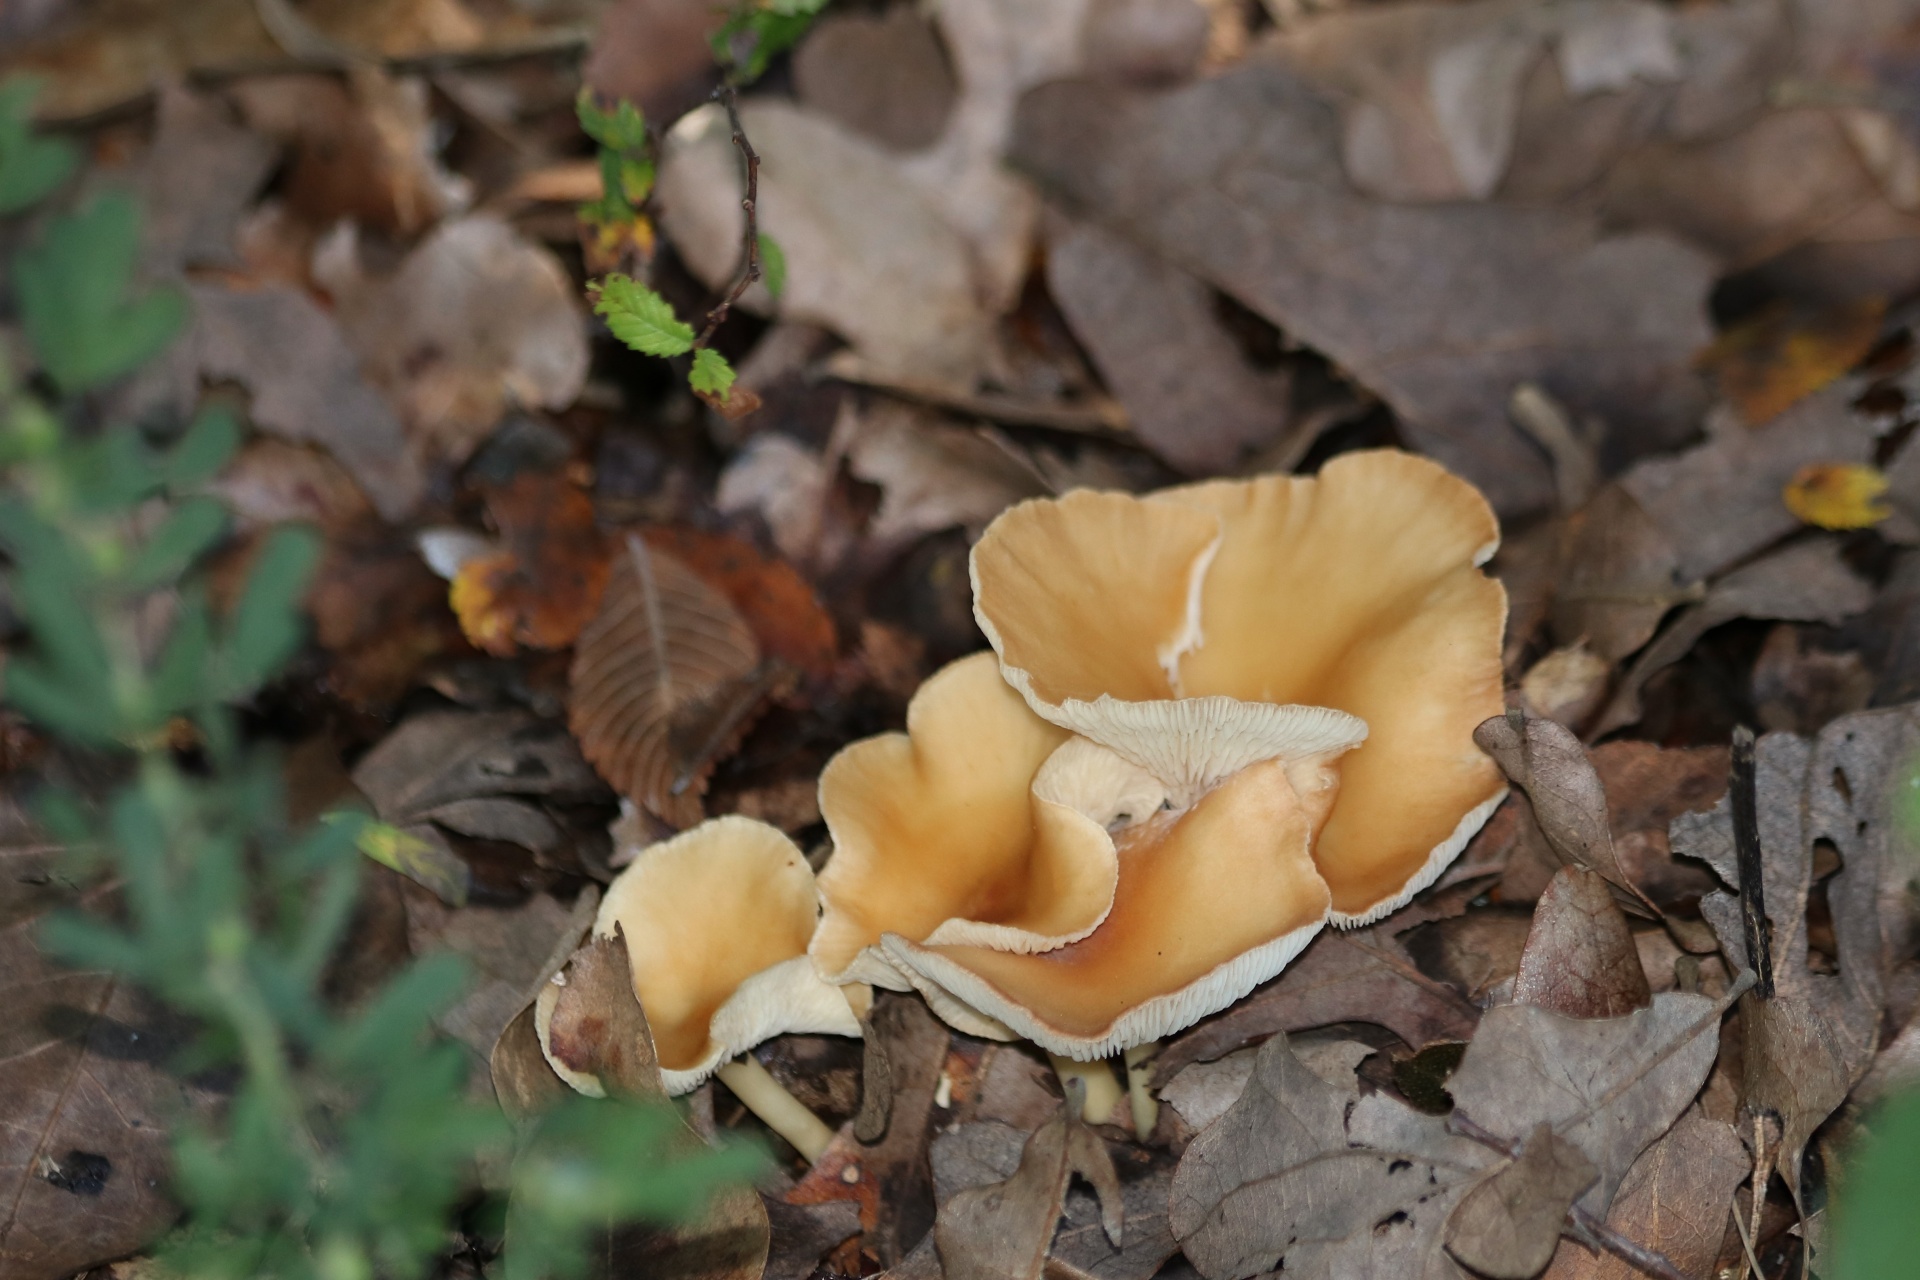 A group of four mushrooms with gold caps and white stems, growing out of brown autumn leaves.